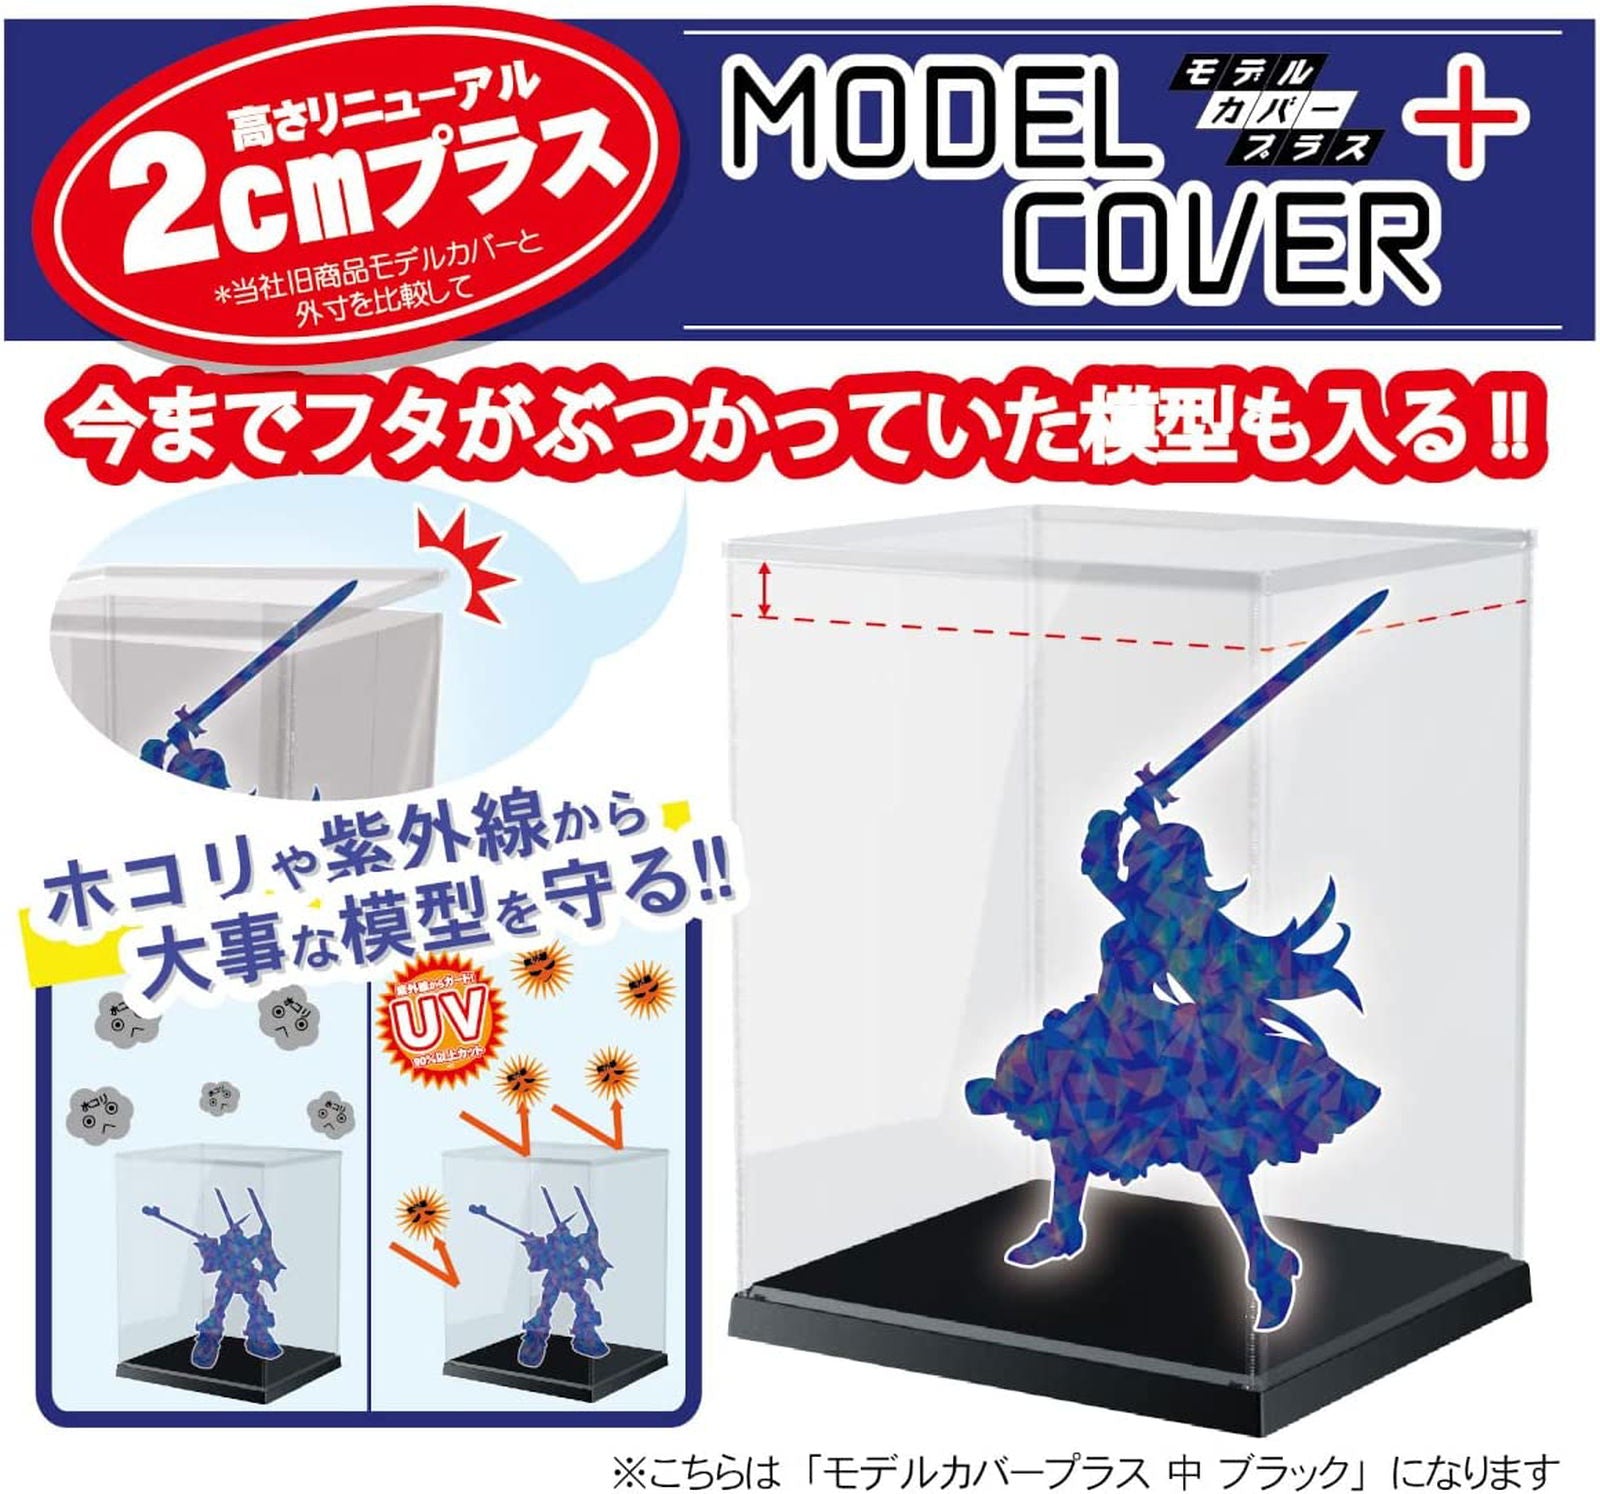 Hobby Base K102CL Model Cover Plus Middle Clear - BanzaiHobby